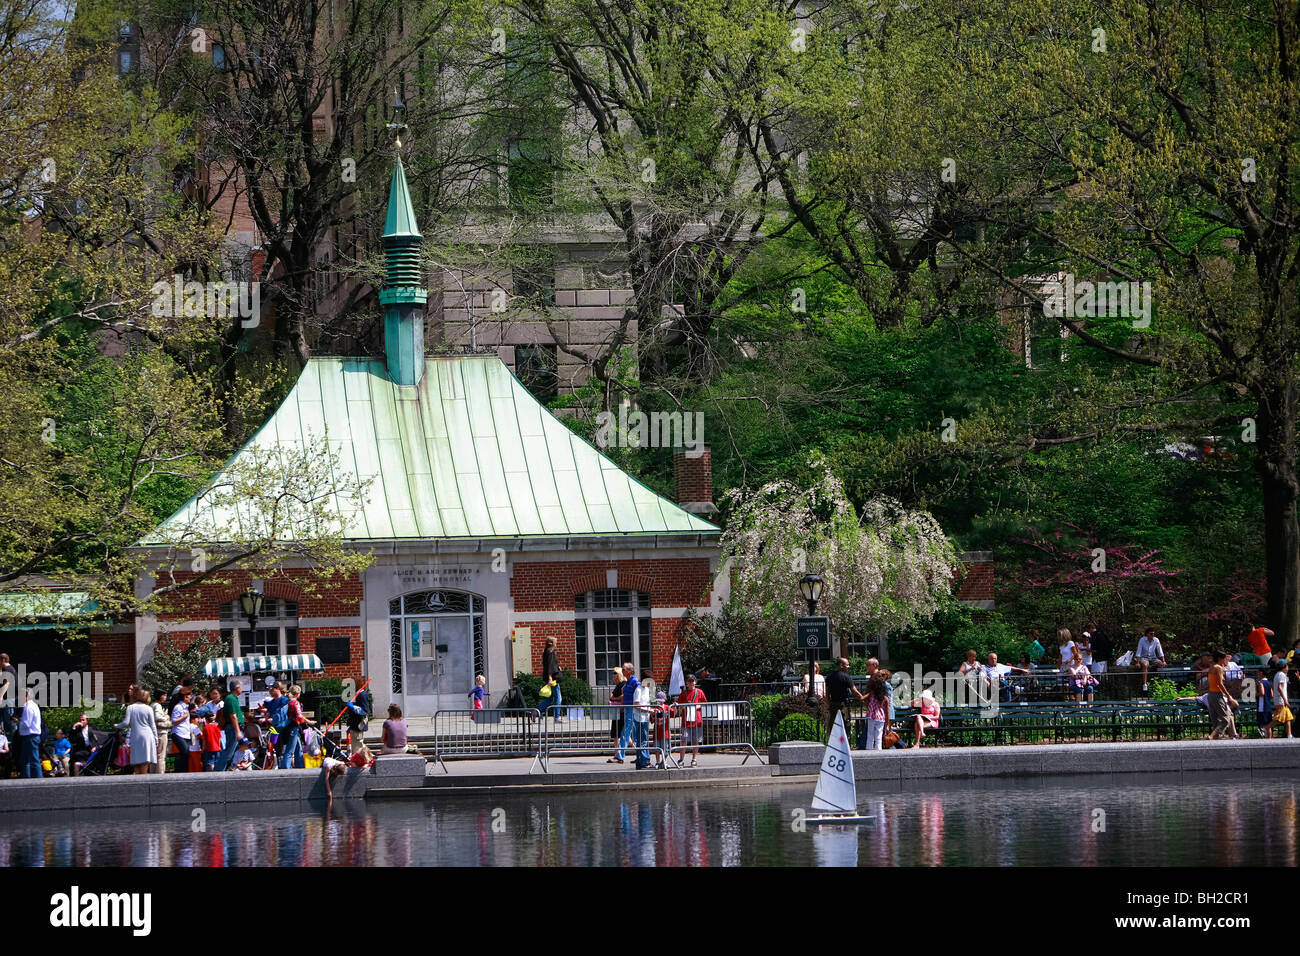 Central Park during spring season when cherry tree blossoms and tourists visit New York city Stock Photo